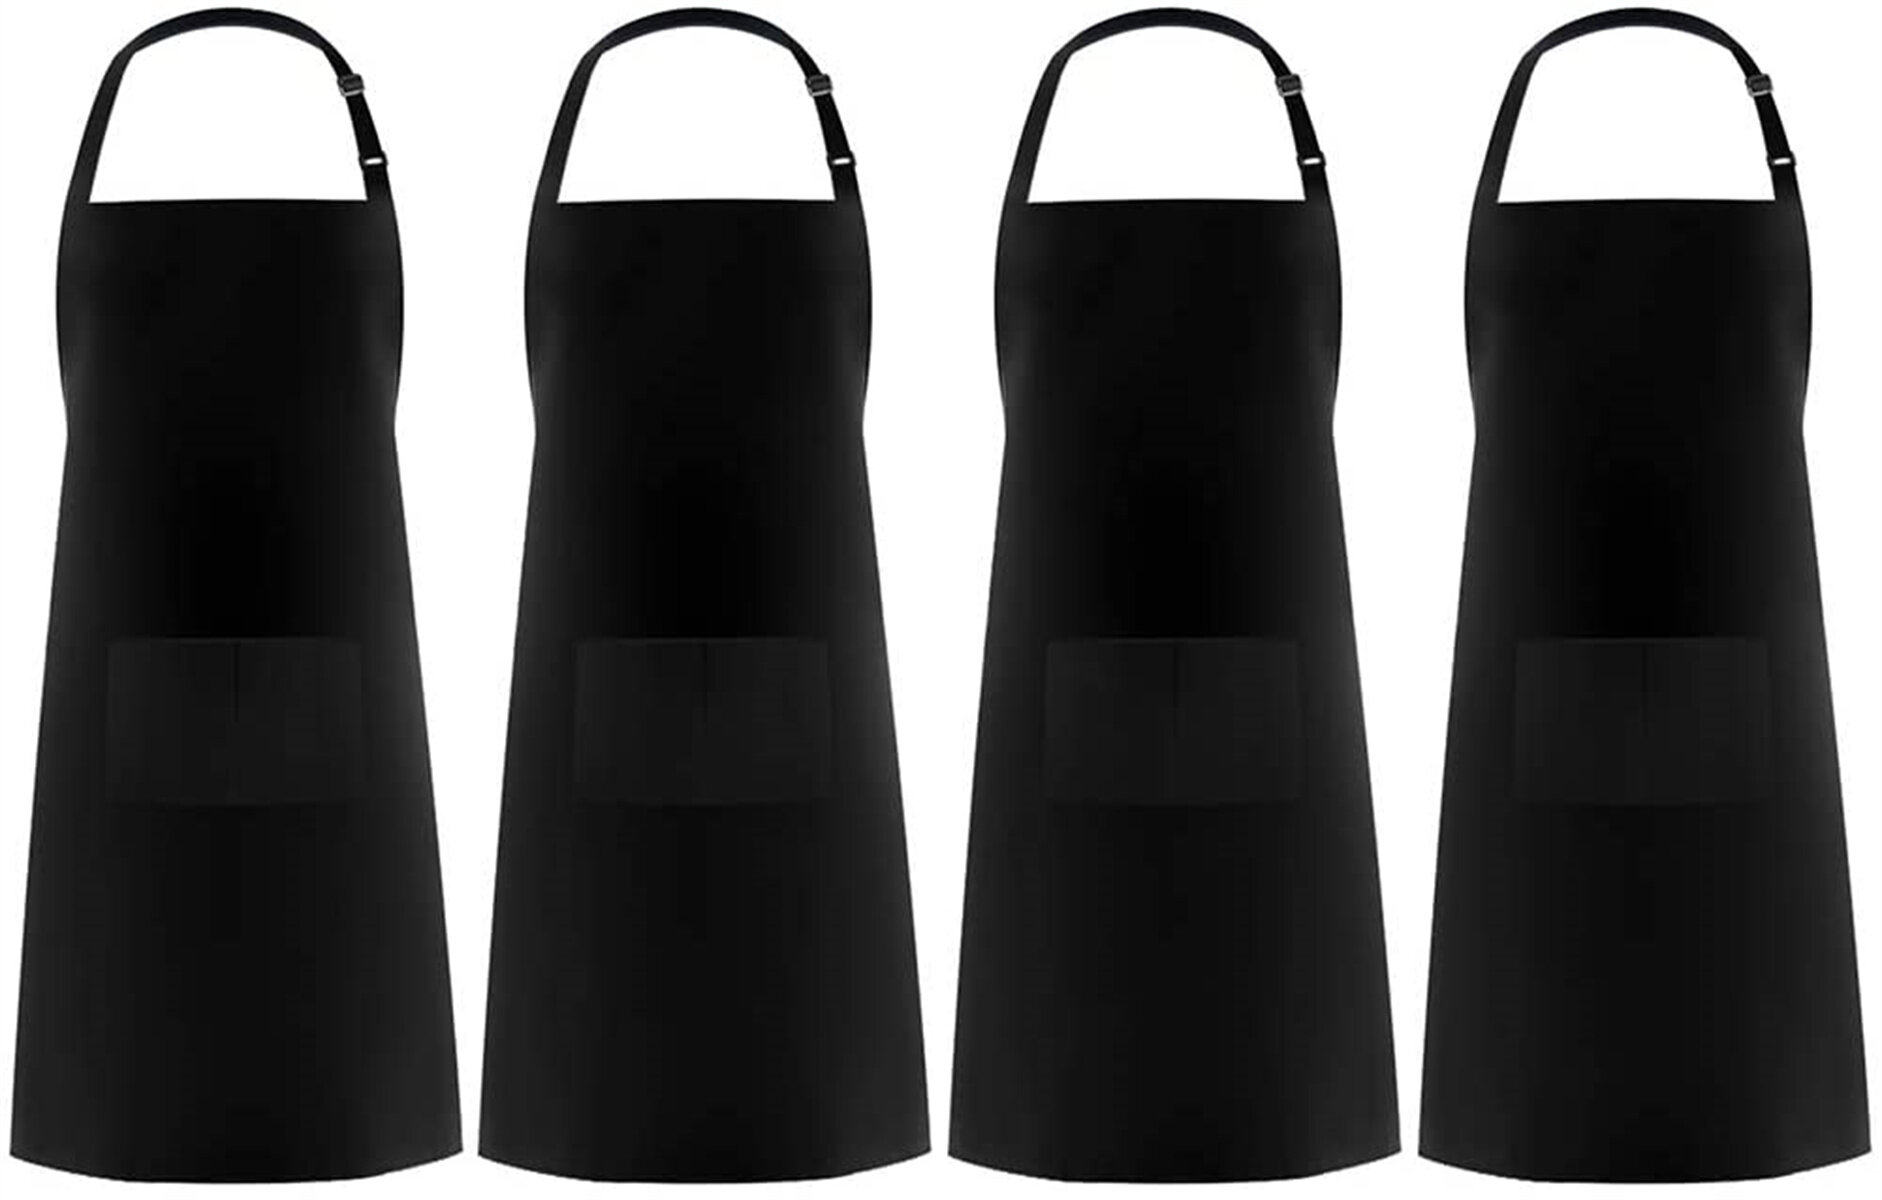 Professional Bib Aprons,12 Pack Bib Aprons with 2 Pockets Unisex Cooking Kitchen Aprons for Chef Couple BBQ Painting,Black